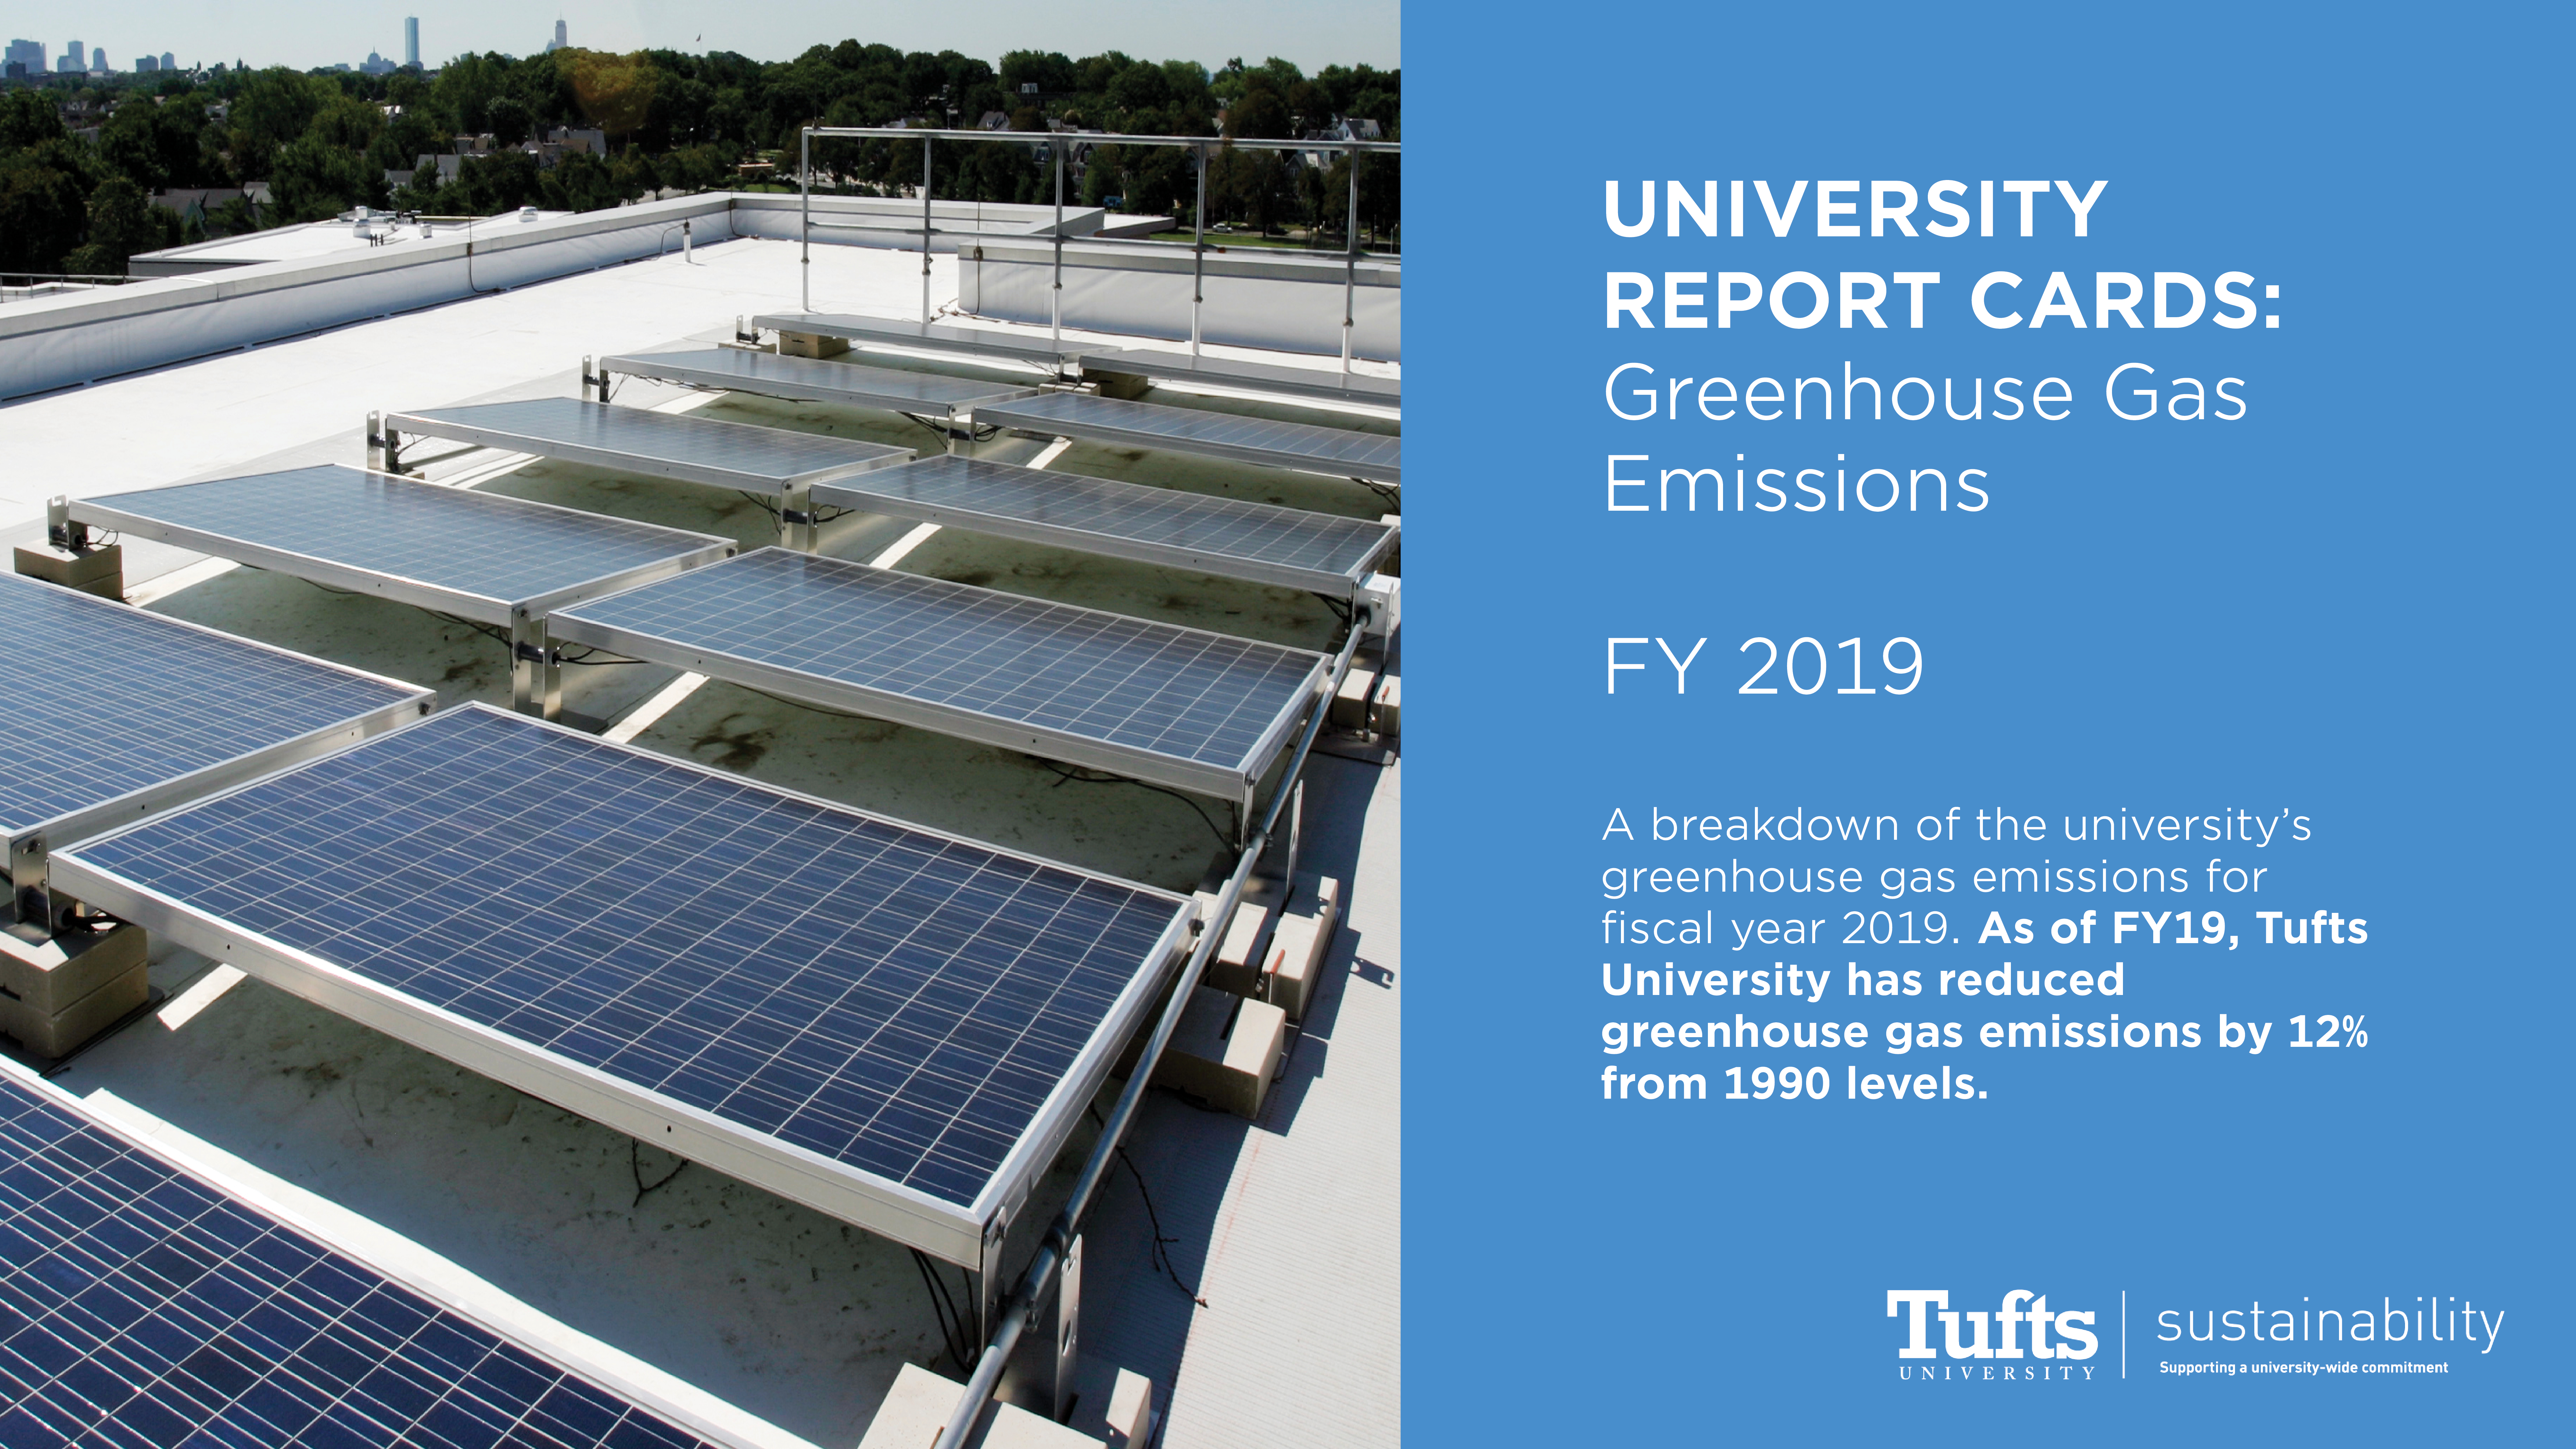 University report card for fiscal year 2019 cover with image of roof solar panels on the left and blue title card on the right reading "UNIVERSITY REPORT CARDS: Greenhouse Gas Emissions FY 2019 A breakdown of the university’s greenhouse gas emissions for fiscal year 2019. As of FY19, Tufts University has reduced greenhouse gas emissions by 12% from 1990 levels."